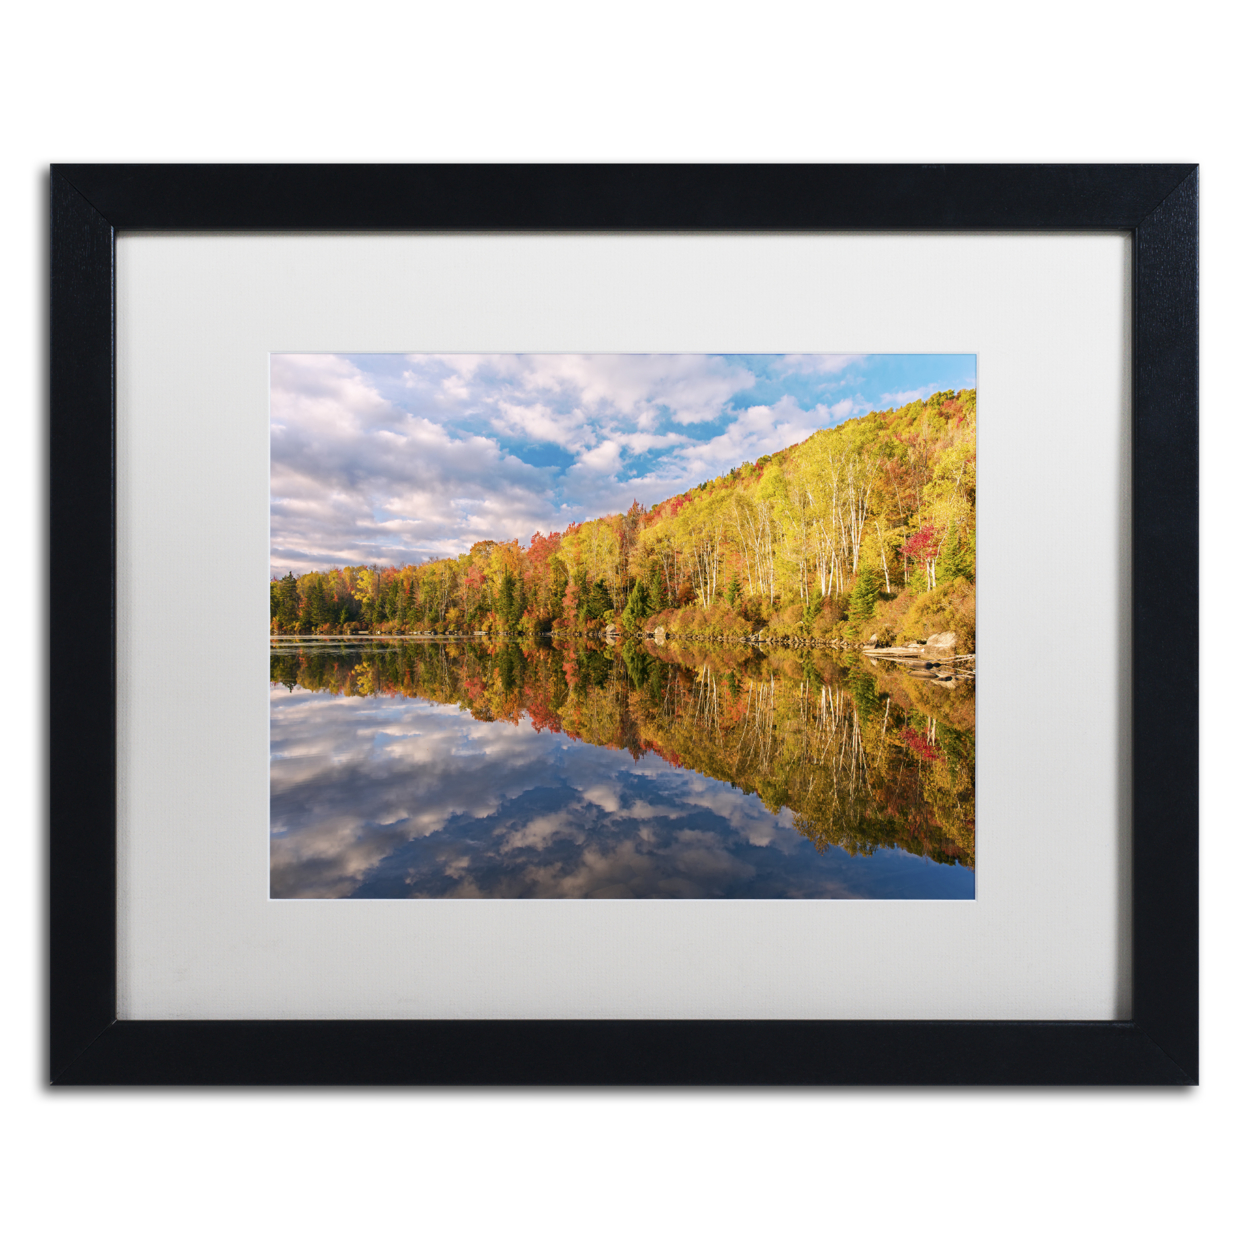 Michael Blanchette Photography 'October Mirror' Black Wooden Framed Art 18 X 22 Inches